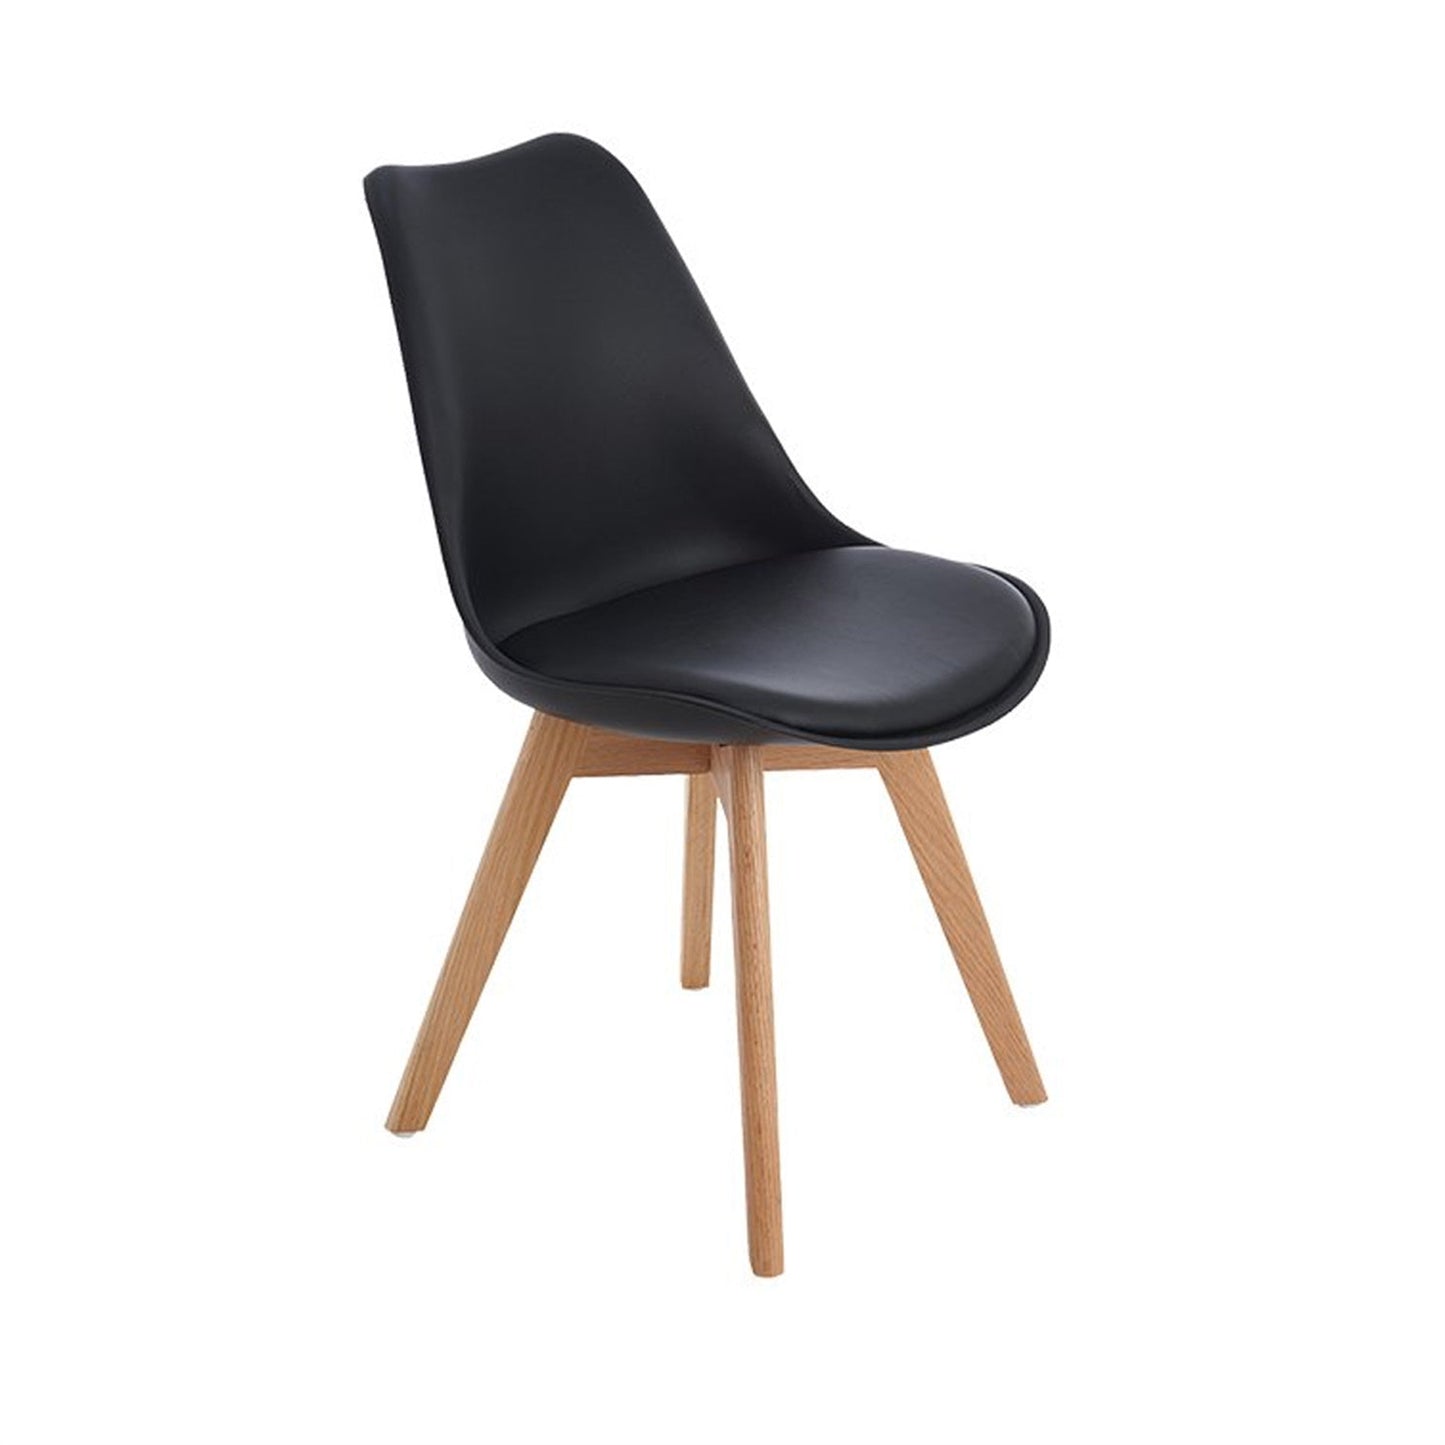 TULIP PP Dining Chair Base with Oak Legs - Black/White/Grey